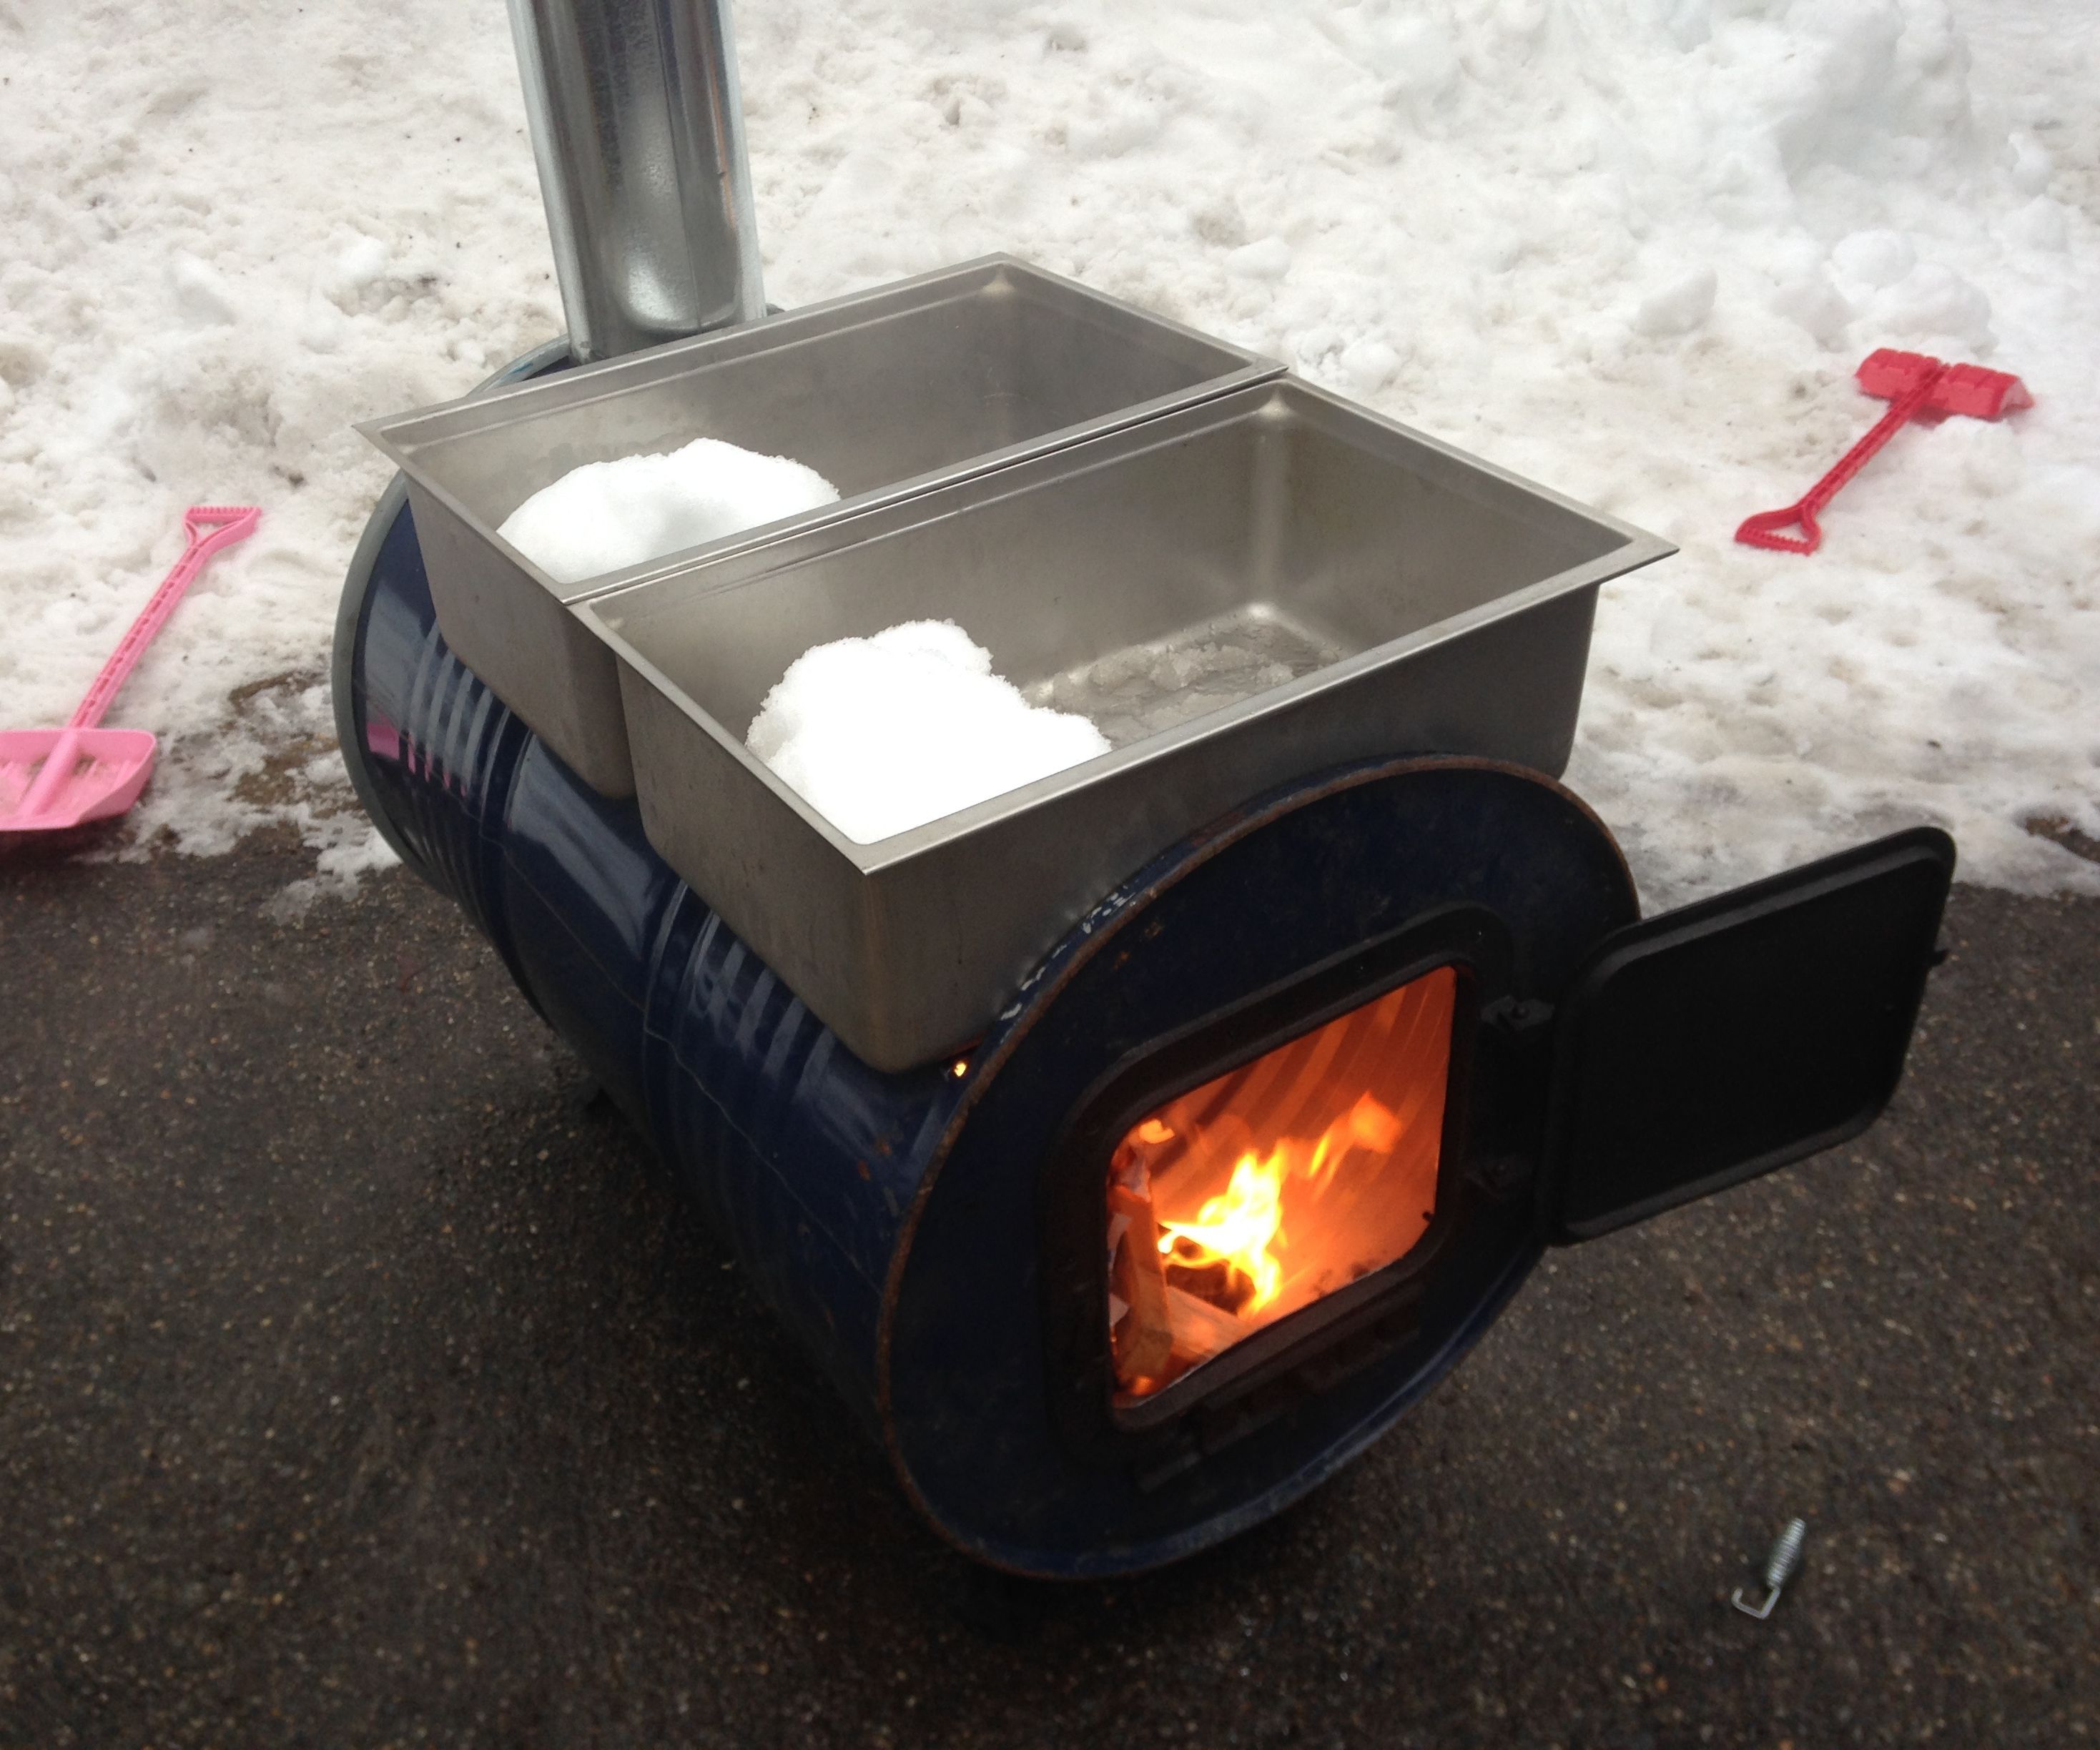 Maple Sap Evaporator for Under $100 and Finished in Under Three Hours